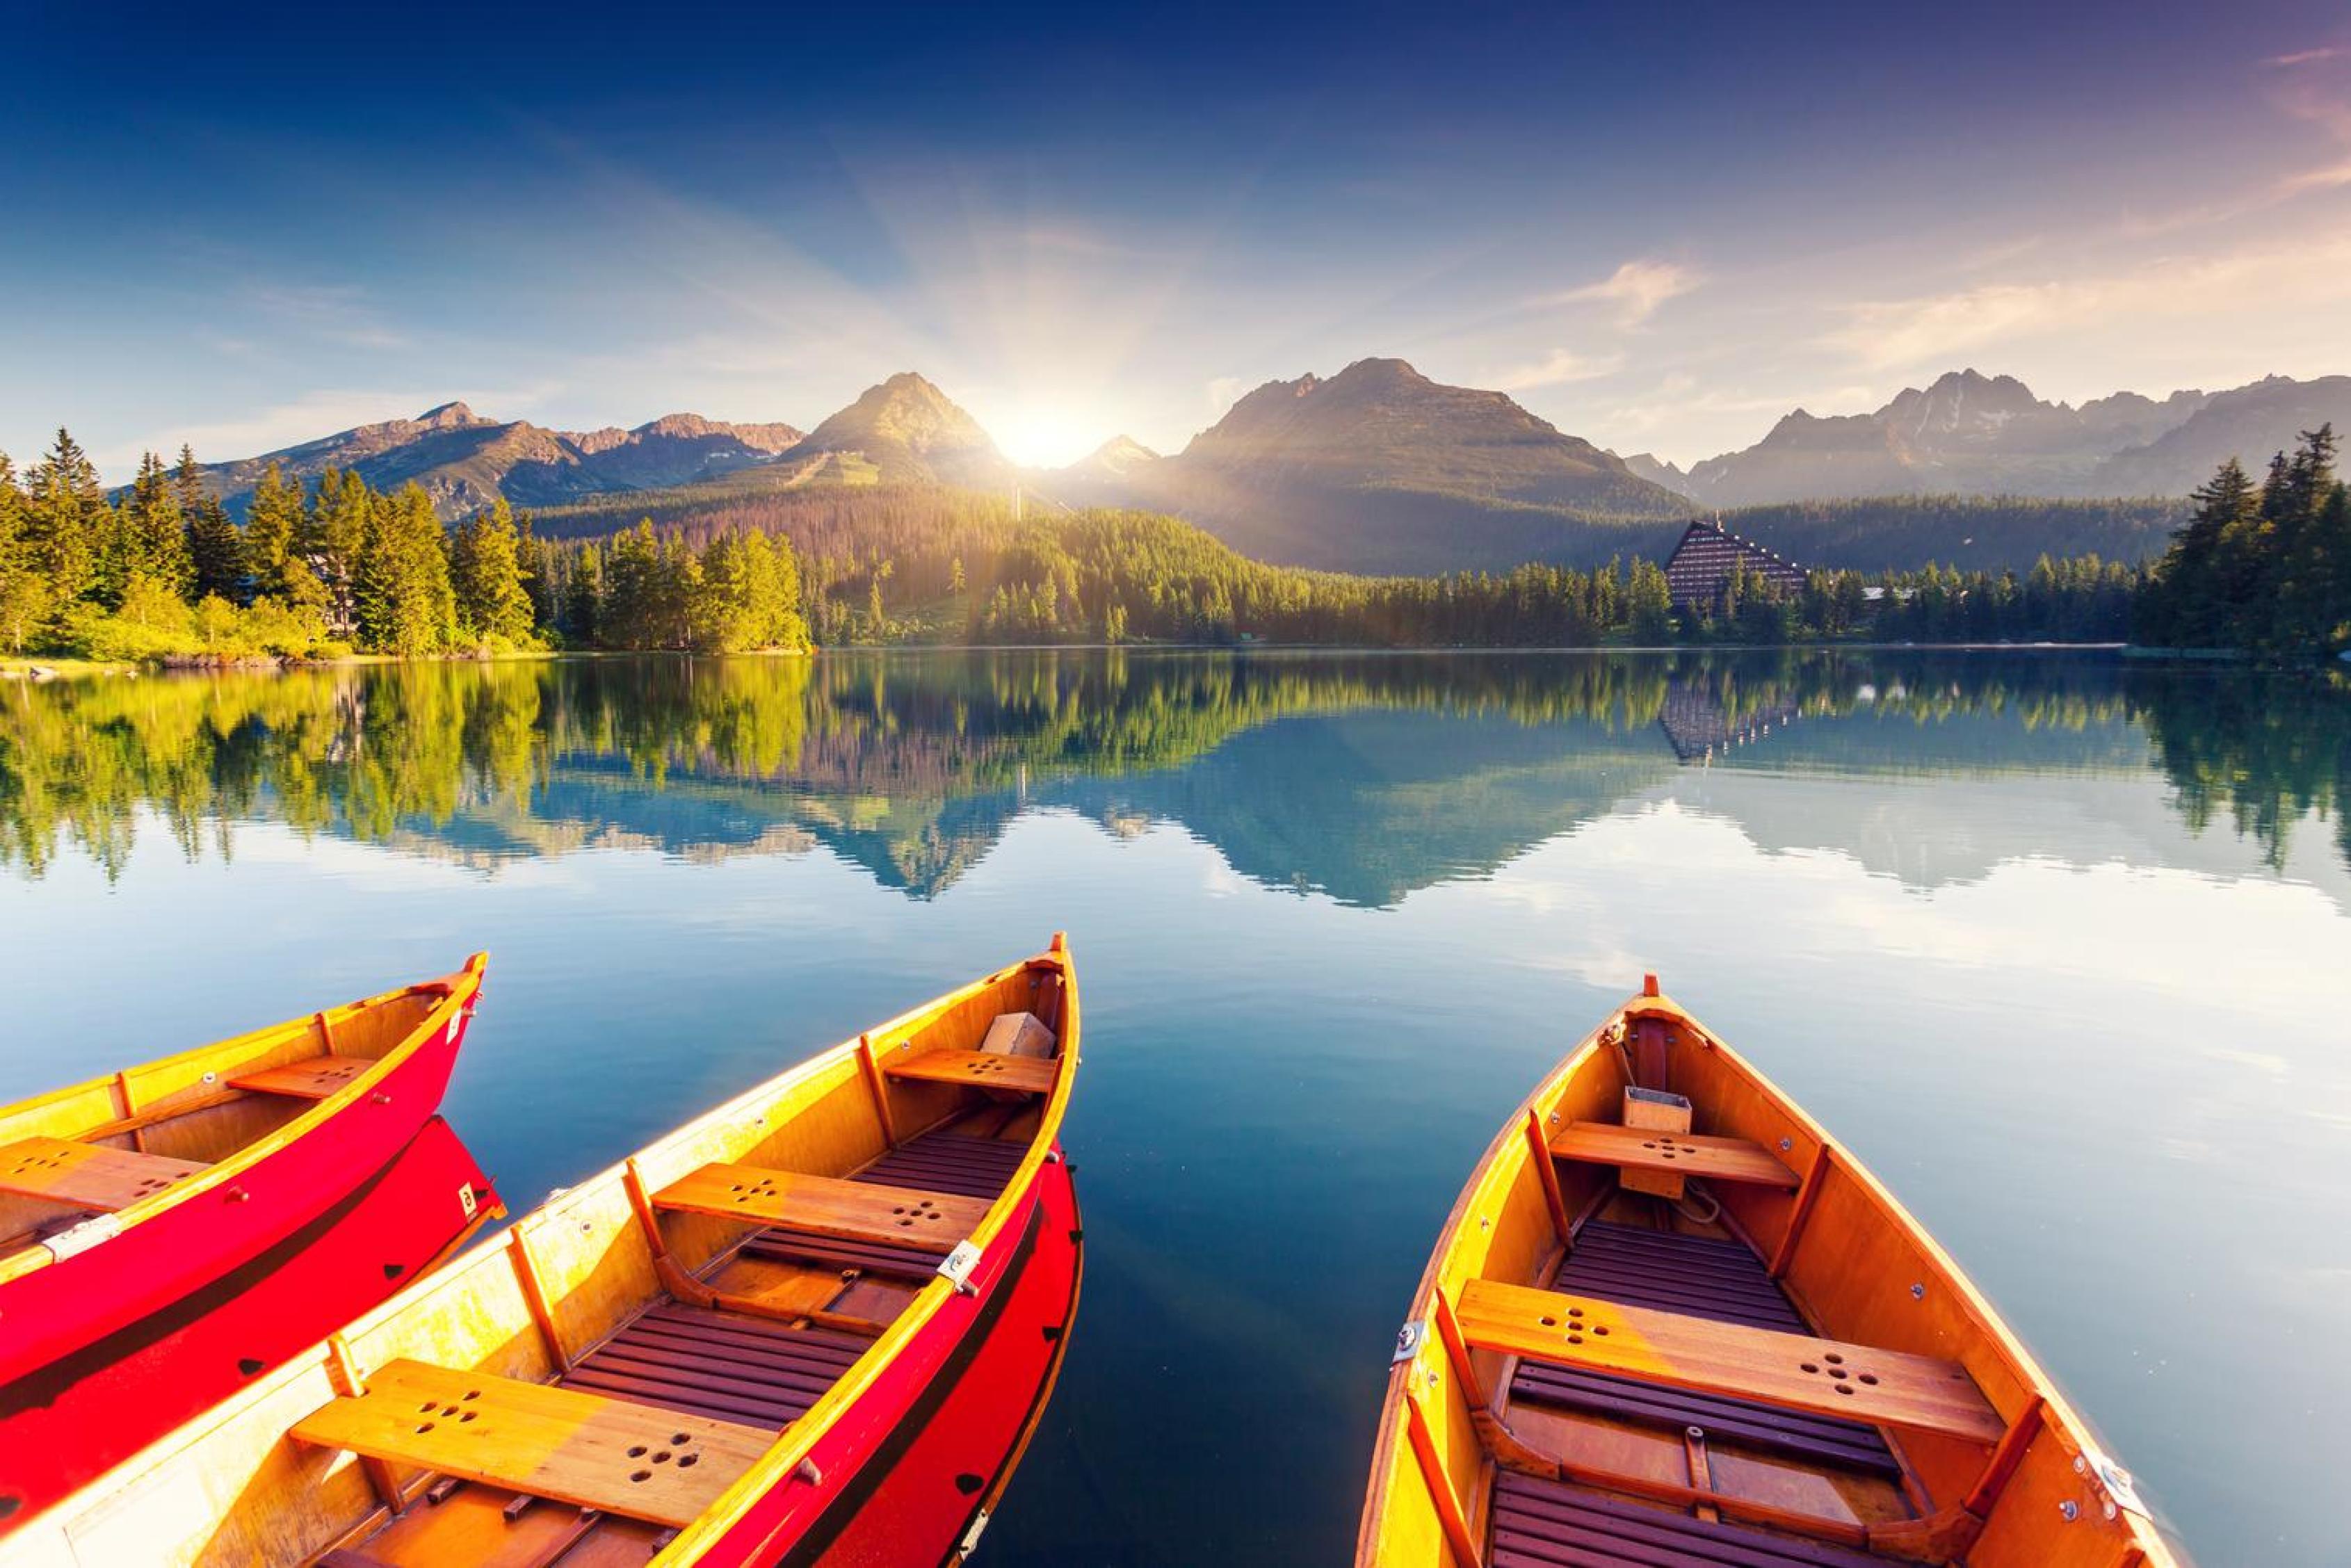 Boats at the edge of a lake with mountains in the background